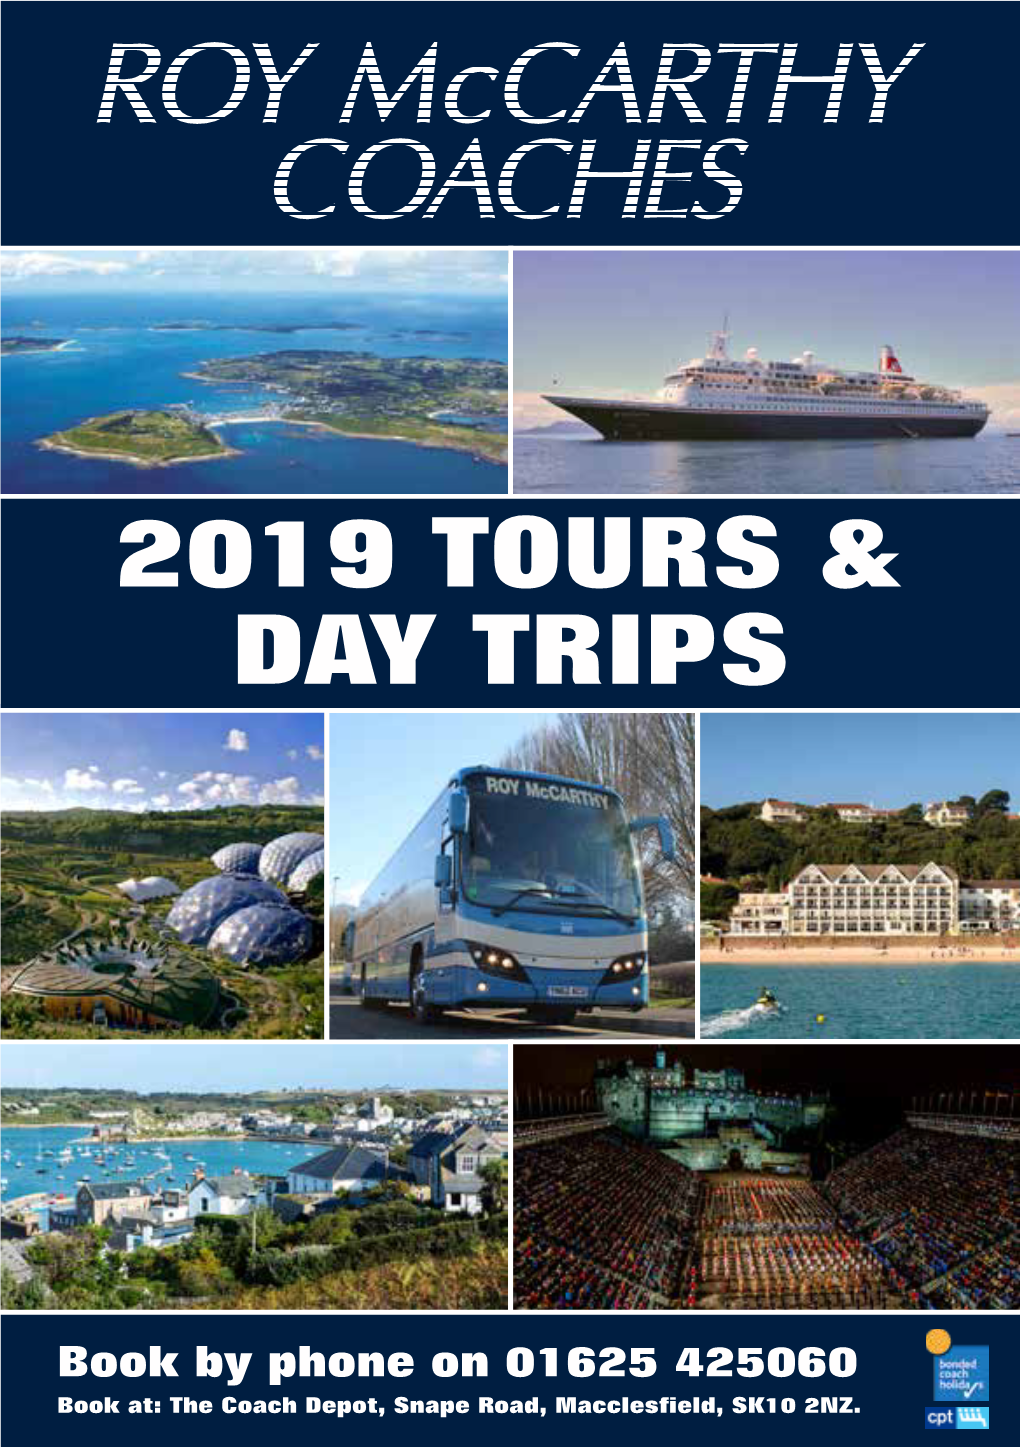 2019 Tours & Day Trips